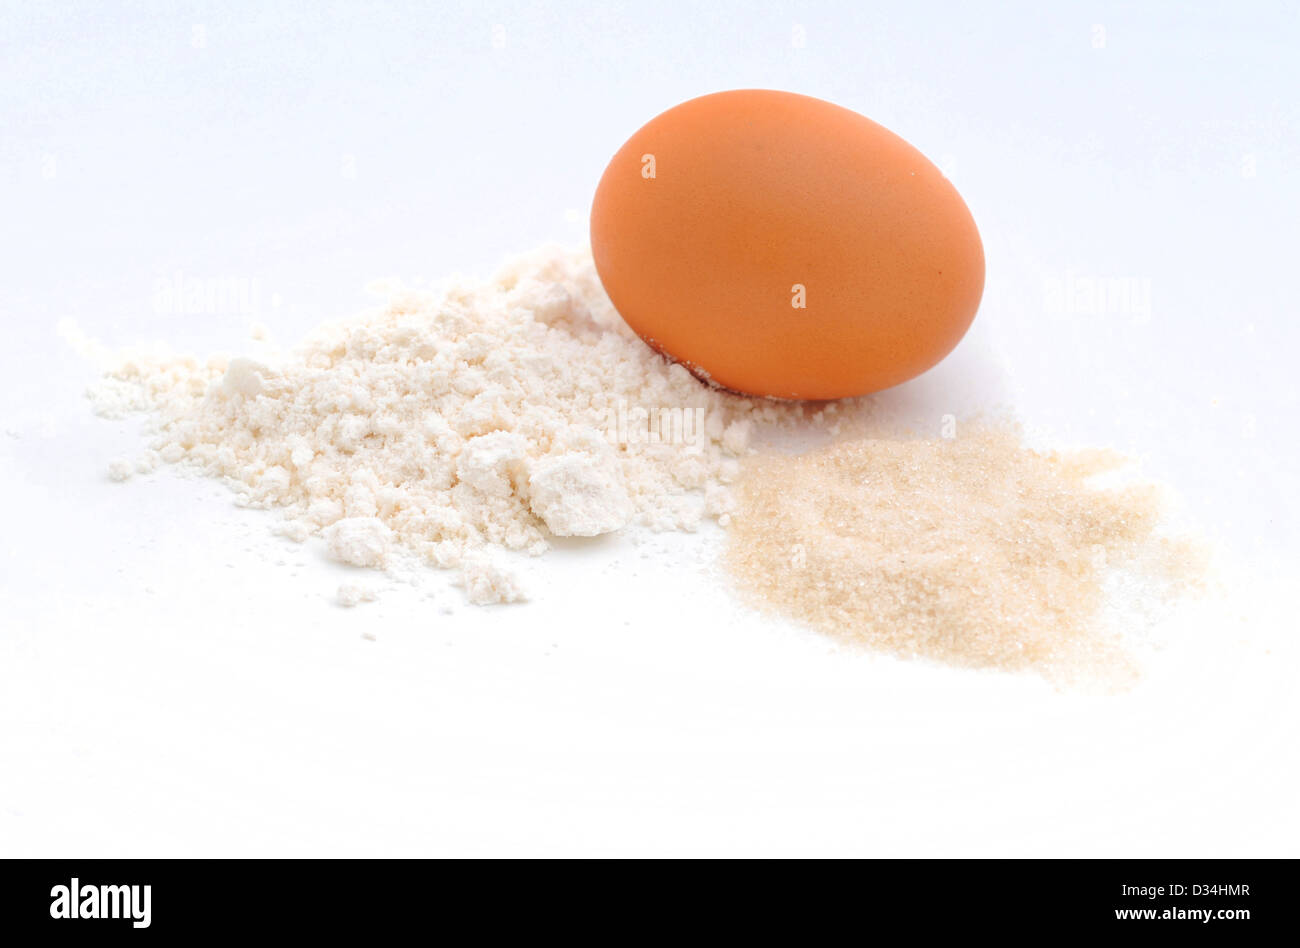 raw ingredients for baking which consists of an egg, flour and sugar Stock Photo